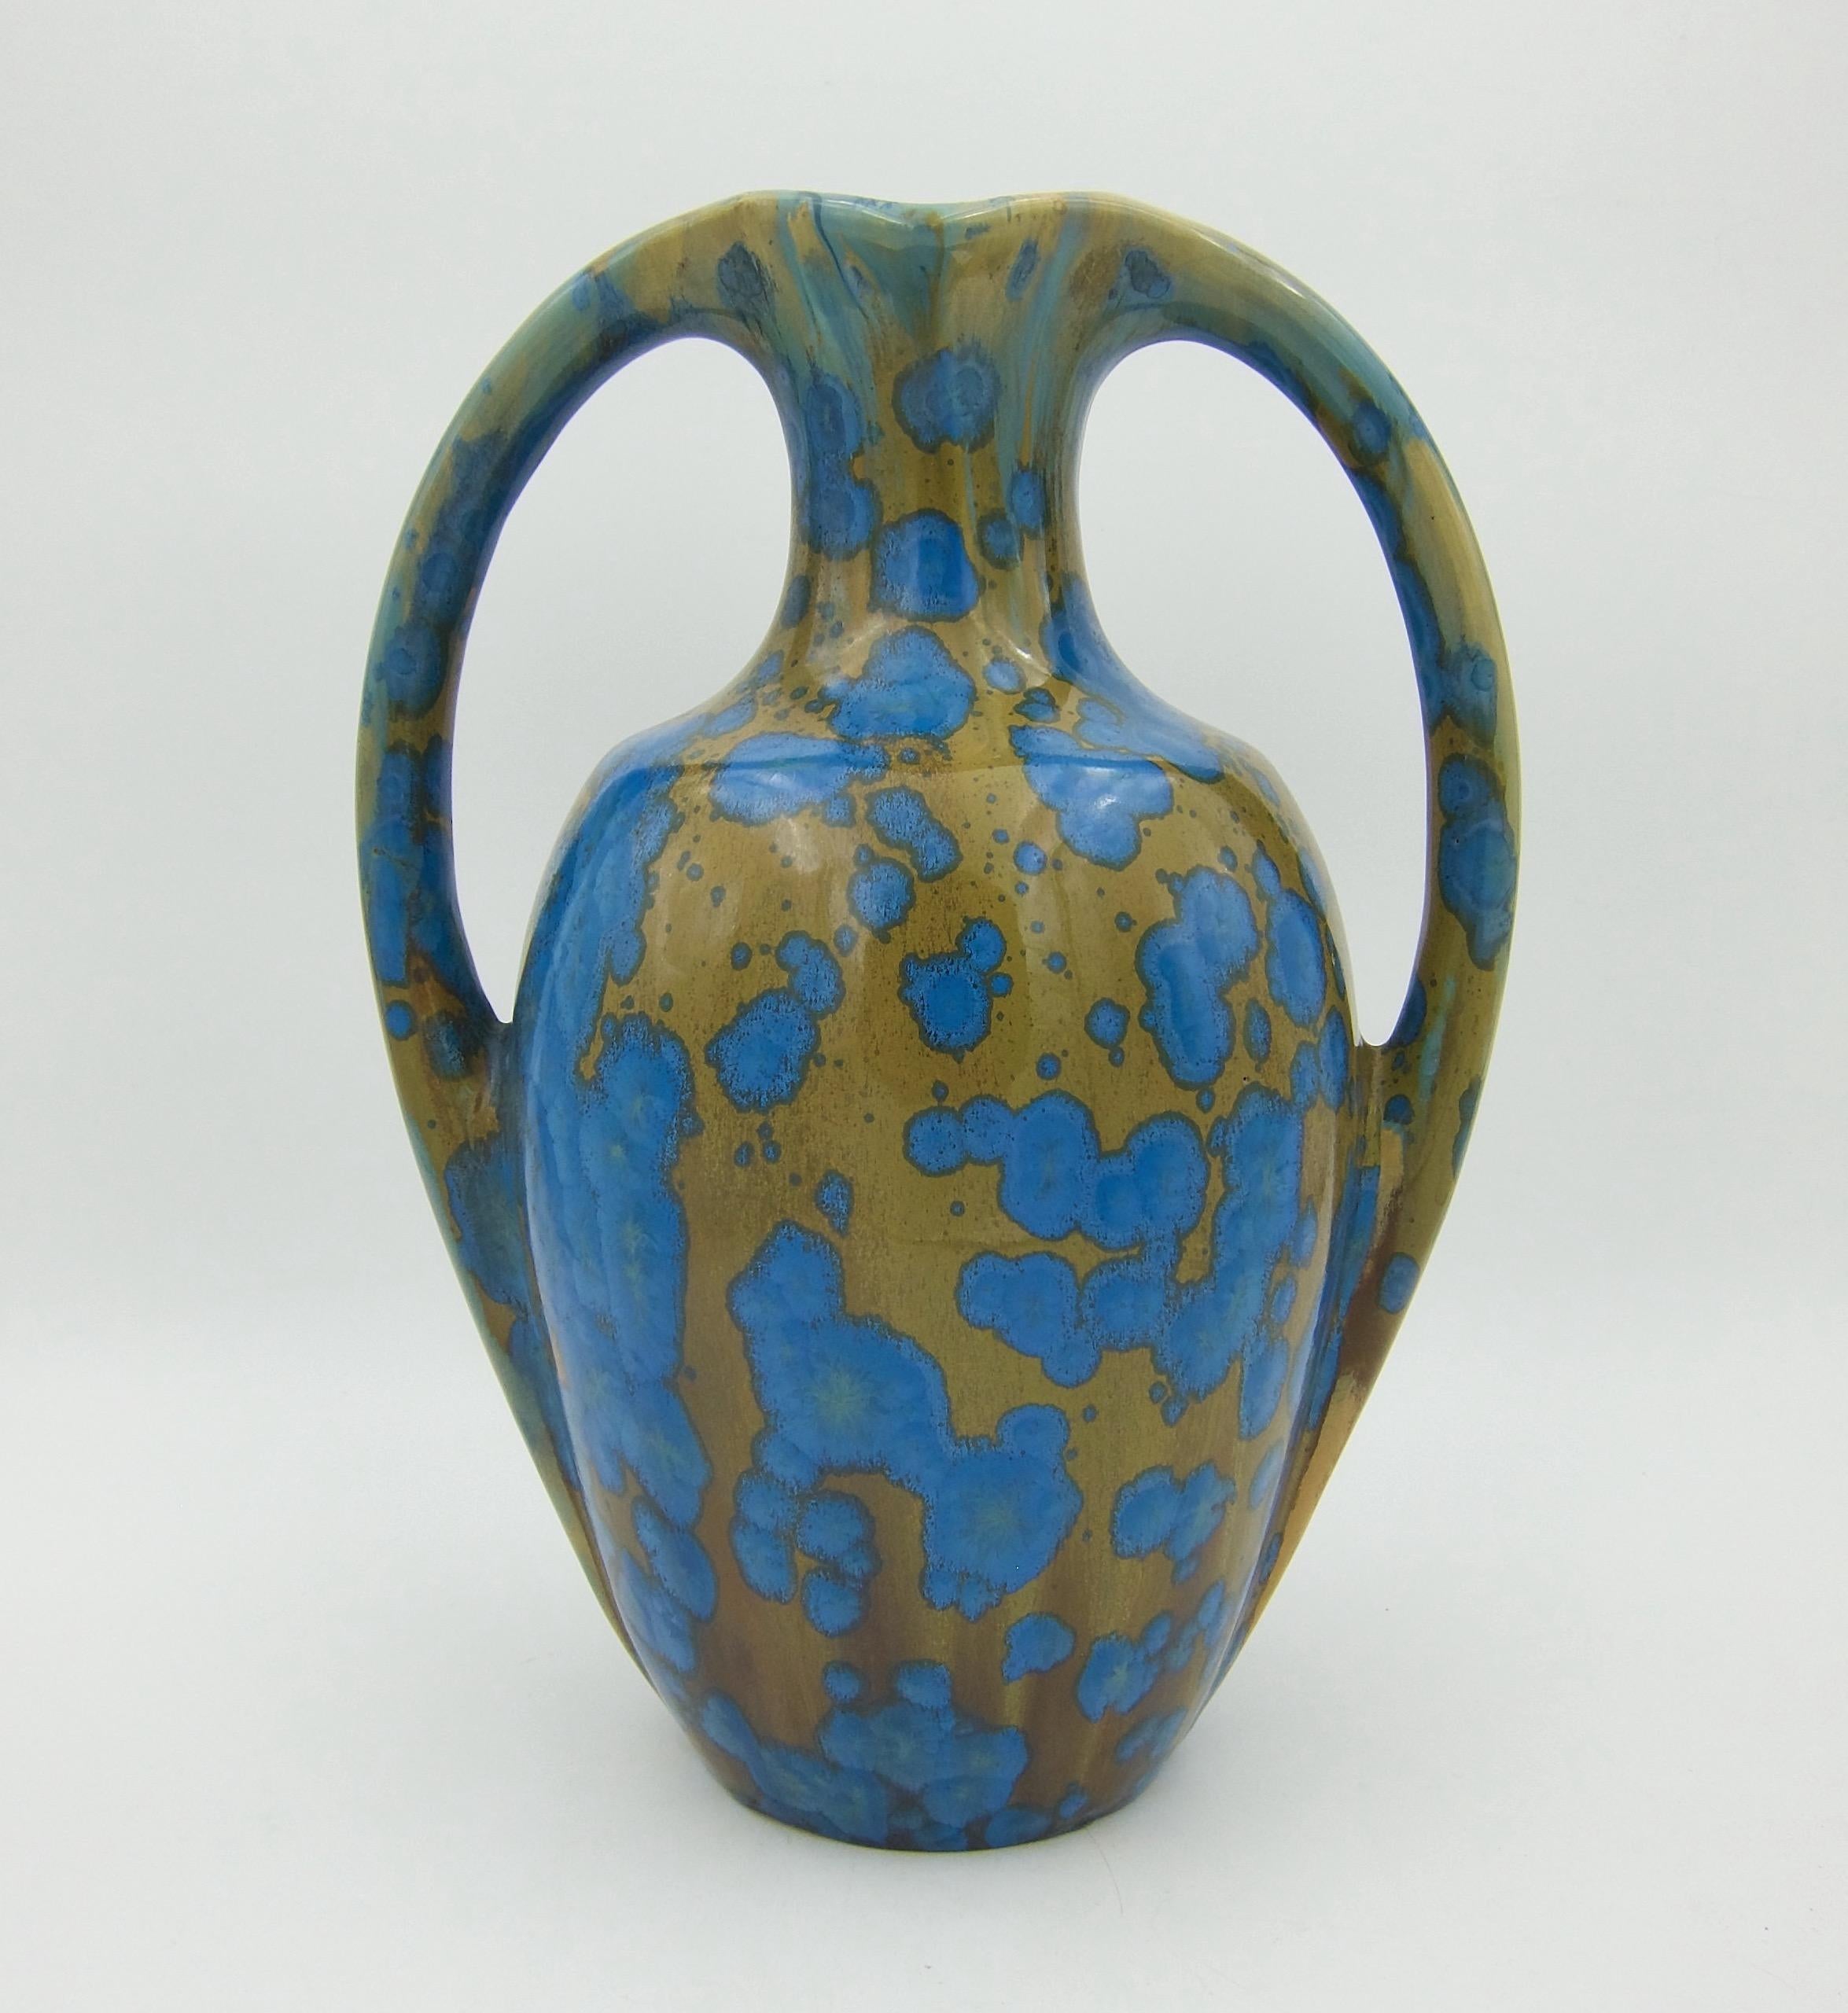 An Art Nouveau two-handle vase from La Faïencerie Héraldique de Pierrefonds Pottery of France. This sculptural and substantial antique vase was handcrafted in stoneware at the turn of the 20th century, circa 1905. Designed with two curved handles